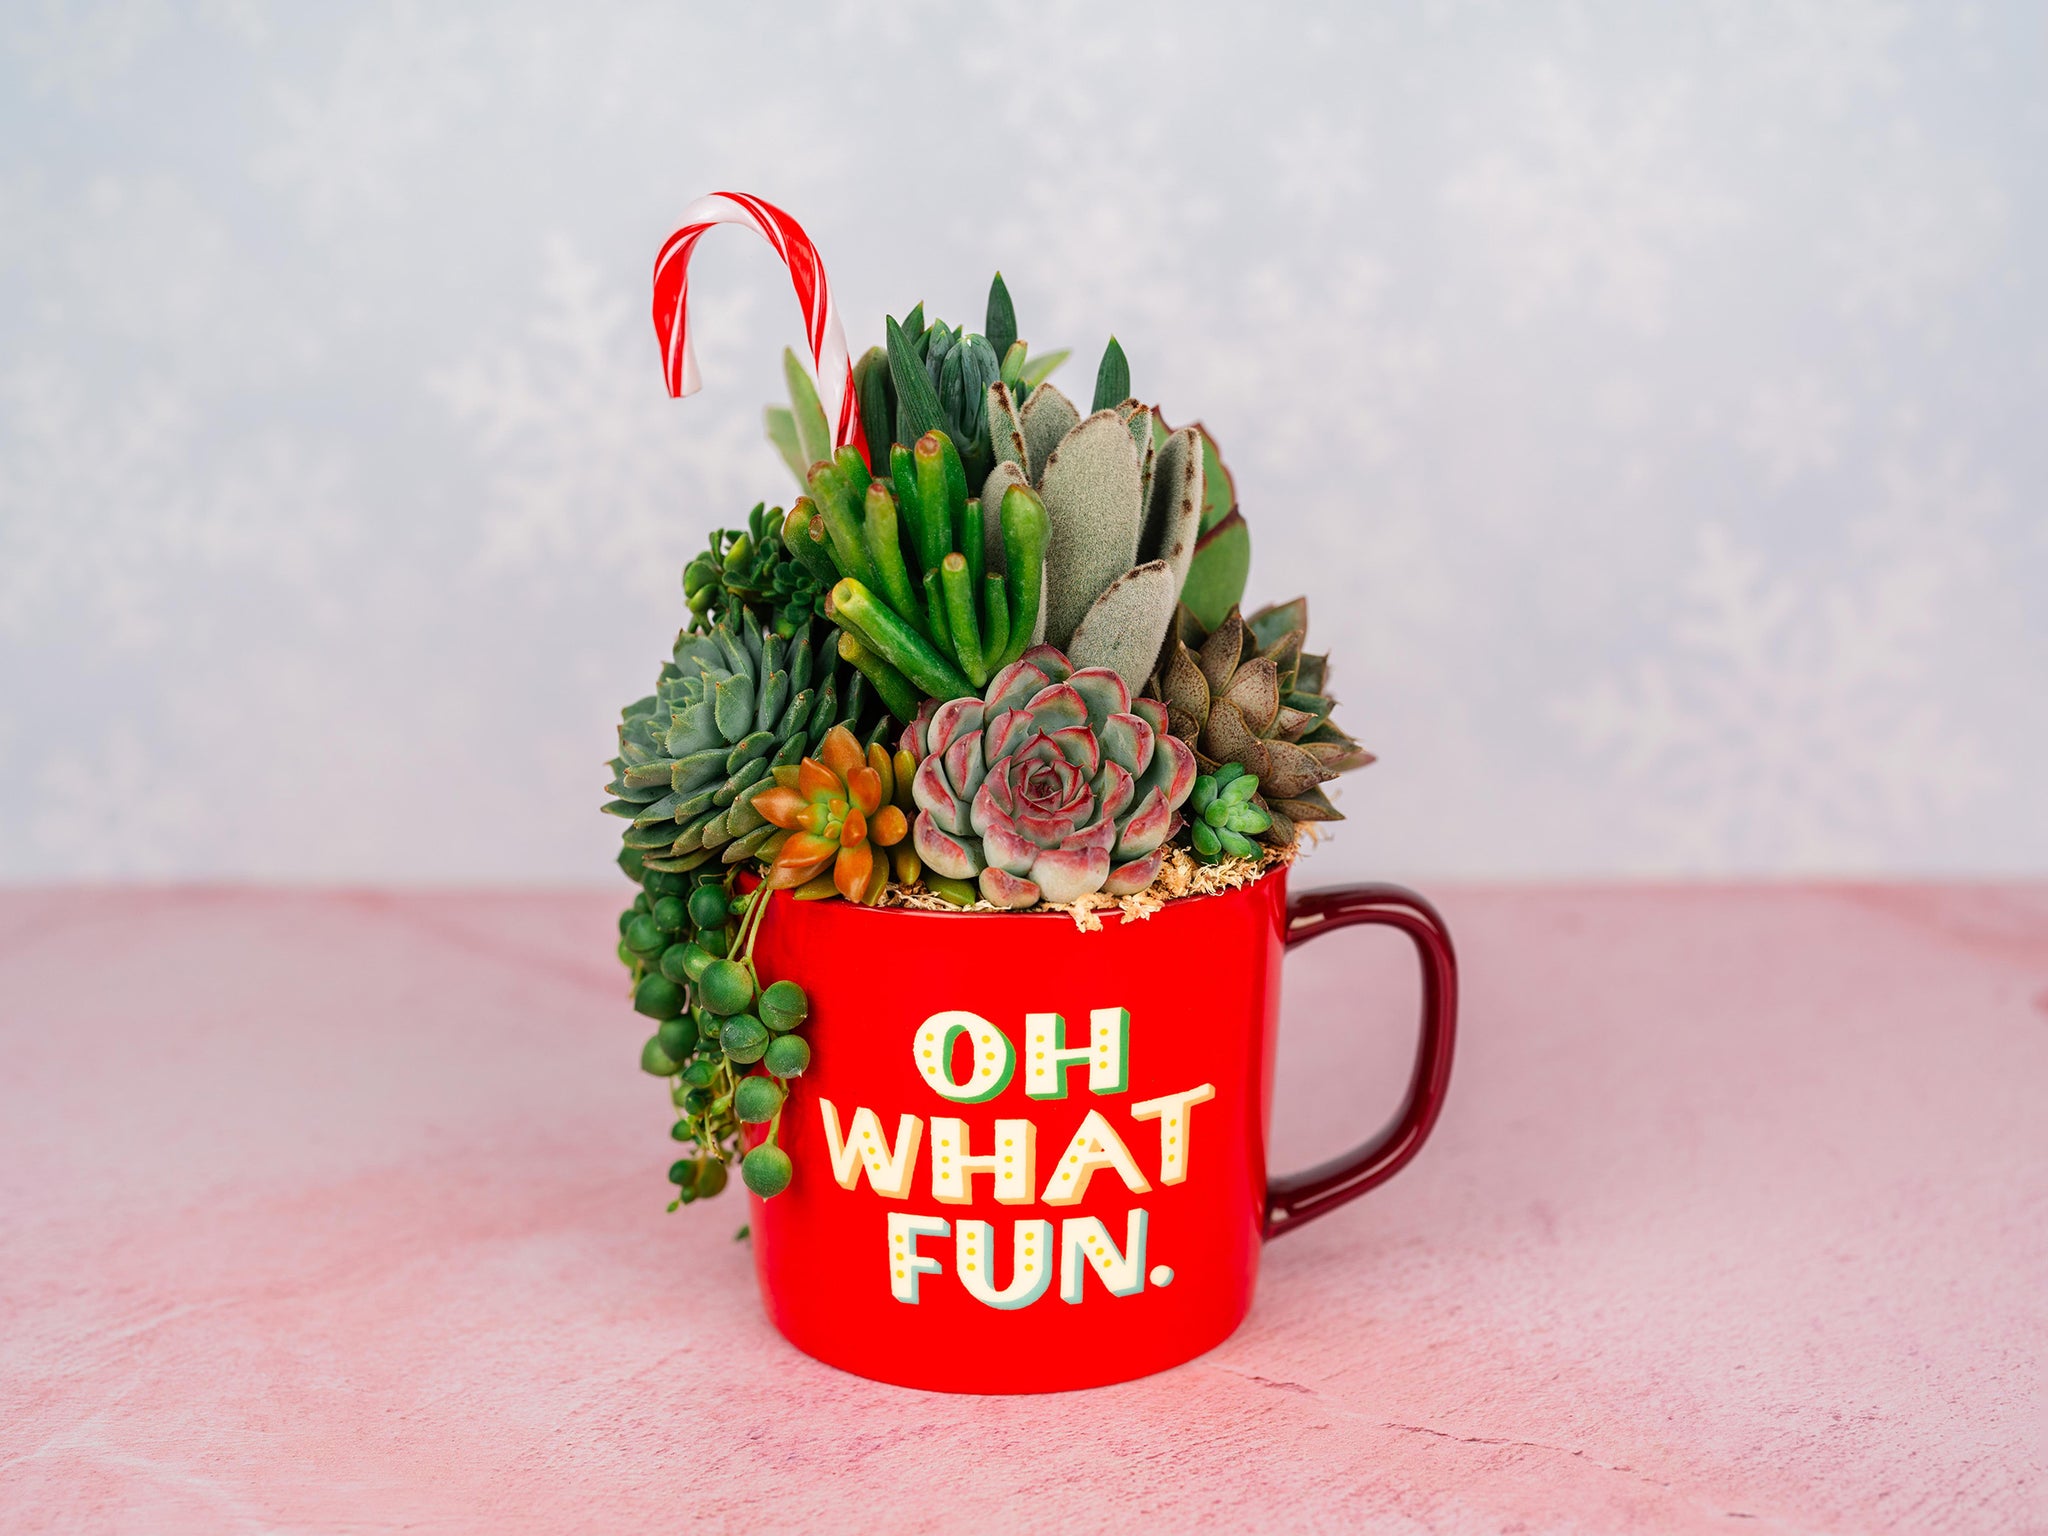 Red Candy Cane Christmas Mug Succulent Holiday Arrangement- Oh What Fun